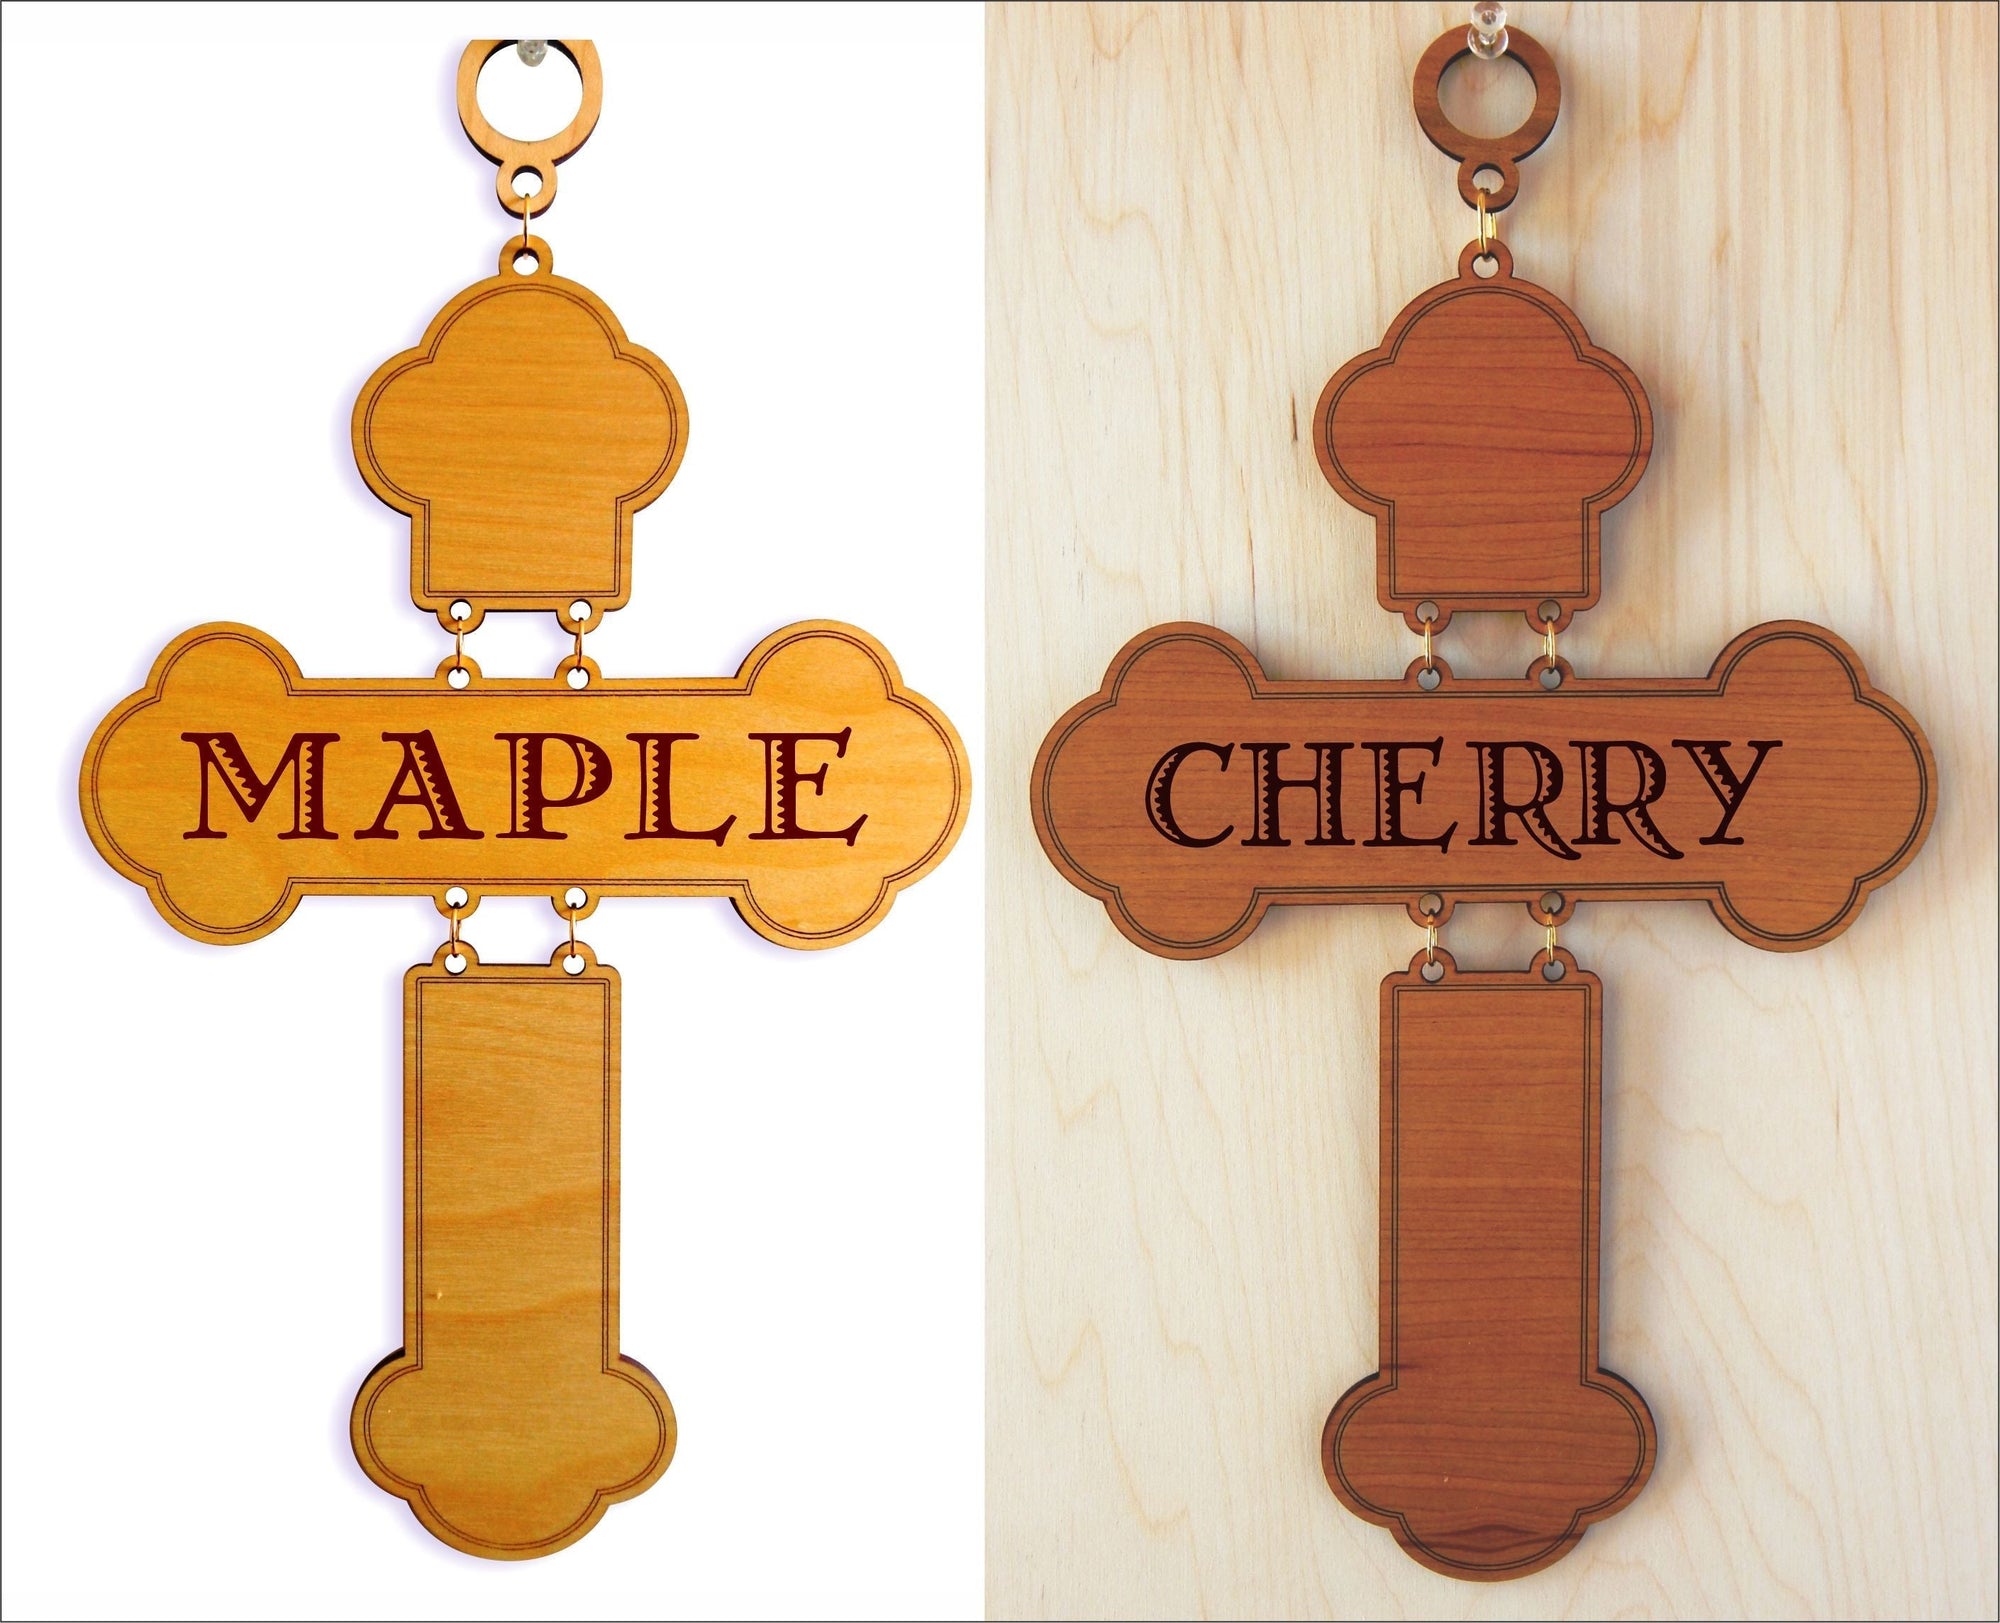 Wedding Officiant Gift Idea for Priest | Pastor Gifts Personalized Wood Cross DWO002